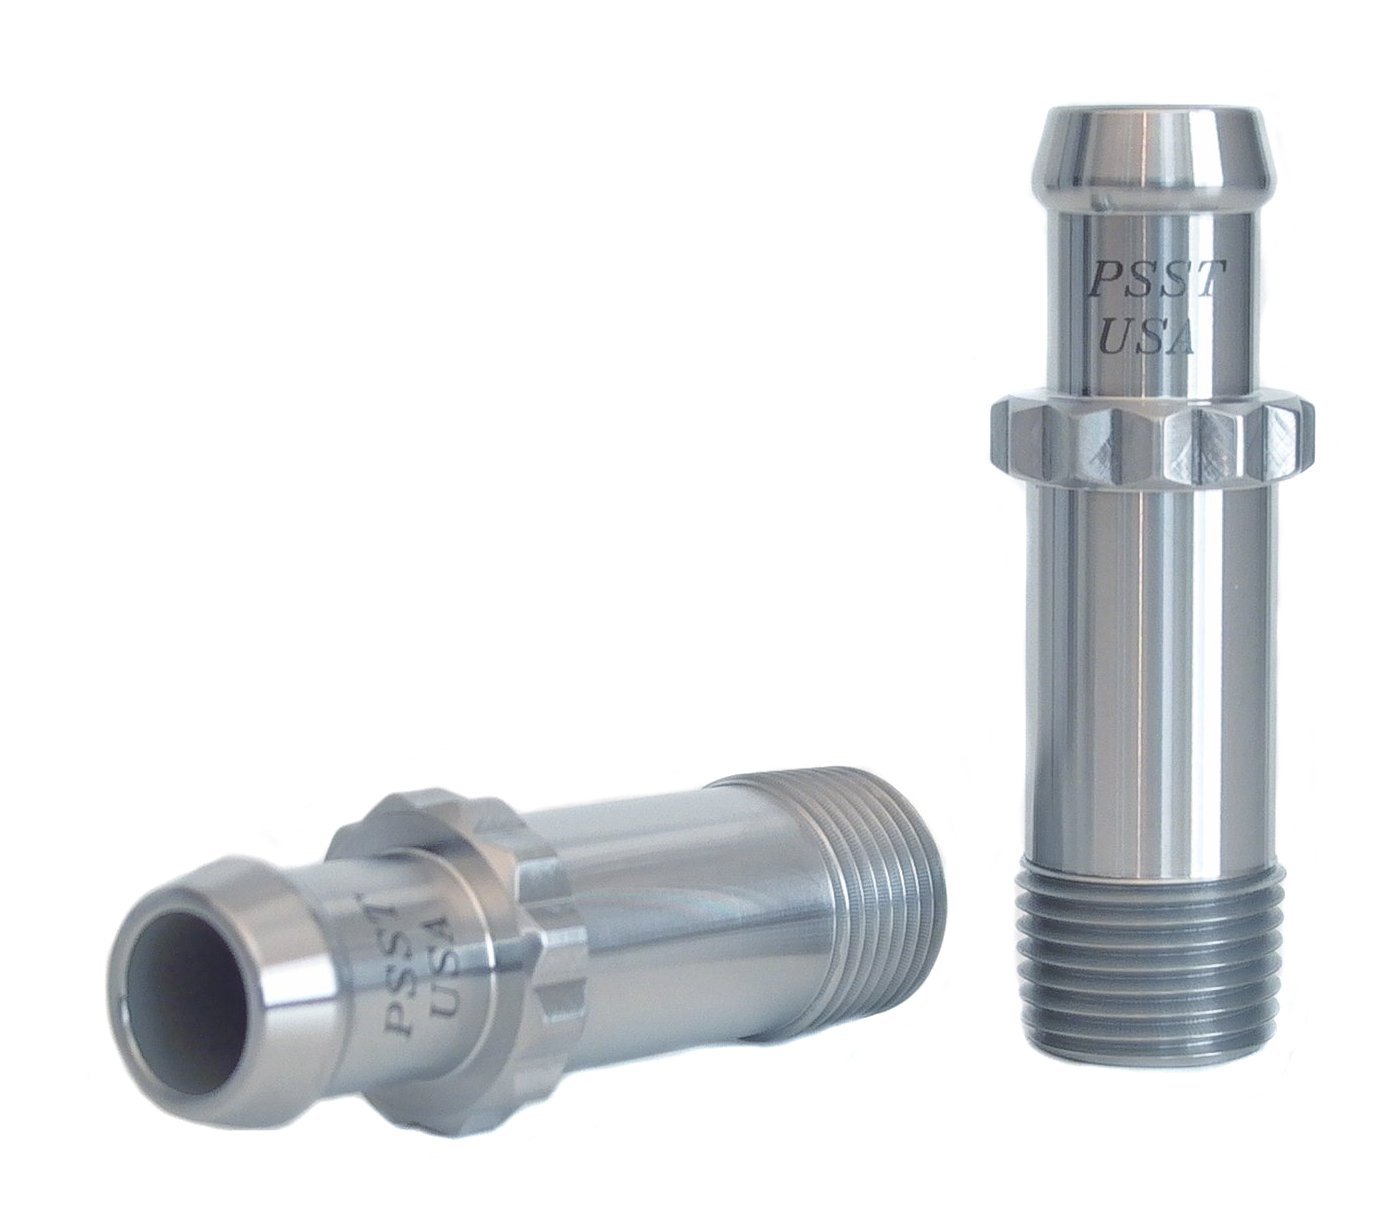 Heater Hose Fitting, Straight, 1/2 in. NPT x 5/8 in. Hose Barb, 2 7/8 in. Length [Polished Finish]